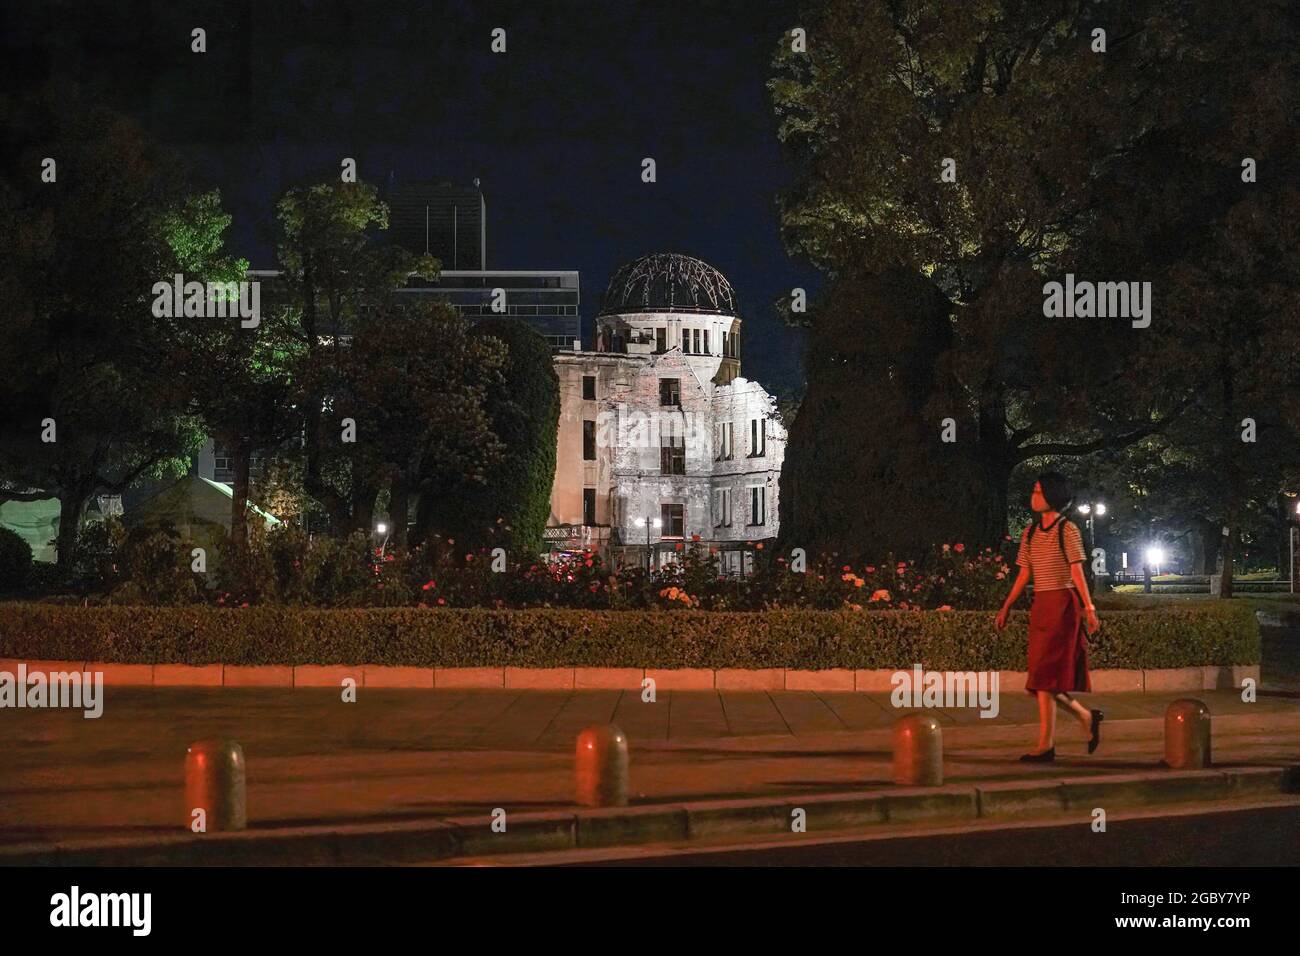 Hiroshima, Japan. 05th Aug, 2021. A woman wearing a face mask as a precaution against the spread of covid-19 walks past the Atomic Bomb Dome that lights up at night.This Friday will mark the 76th anniversary of the atomic bombing of Hiroshima, which killed about 150,000 people and destroyed the entire city for the first bombing with a nuclear weapon in war. Limited guests and Japan's dignitaries including Prime Minister Yoshihide Suga will attend the Peace Memorial Ceremony amid the coronavirus pandemic. Credit: SOPA Images Limited/Alamy Live News Stock Photo